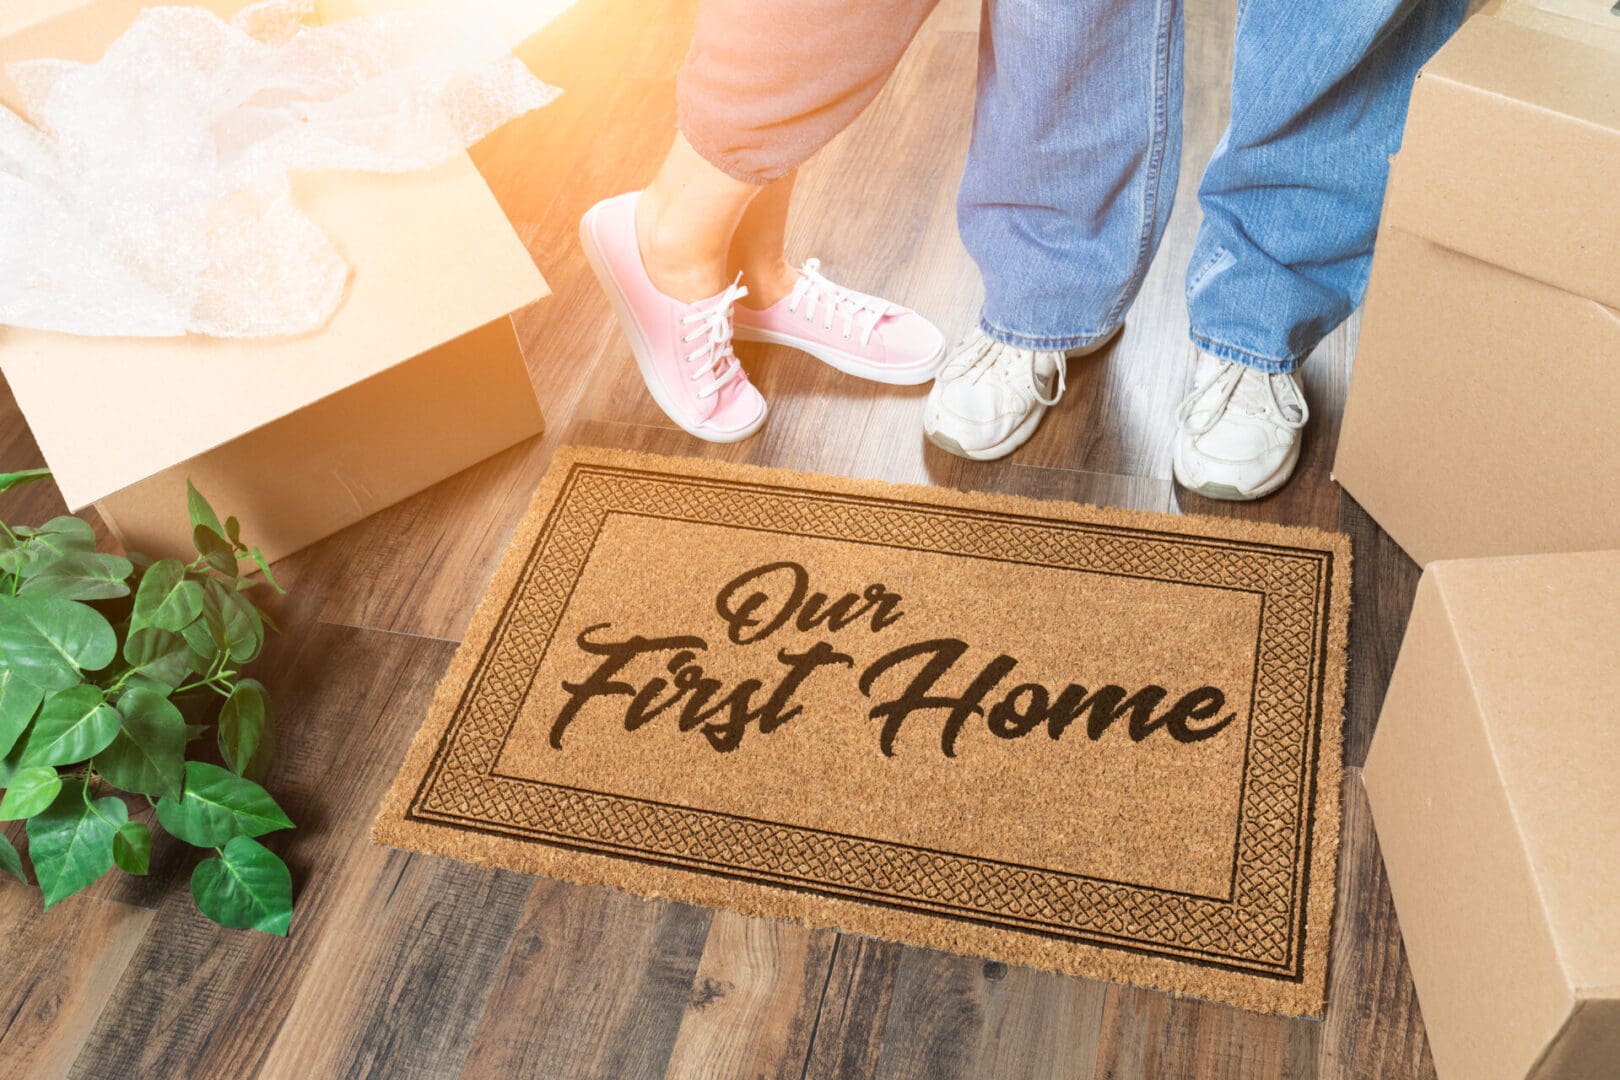 Two first-time home buyers standing next to a "our first home" doormat, surrounded by moving boxes.